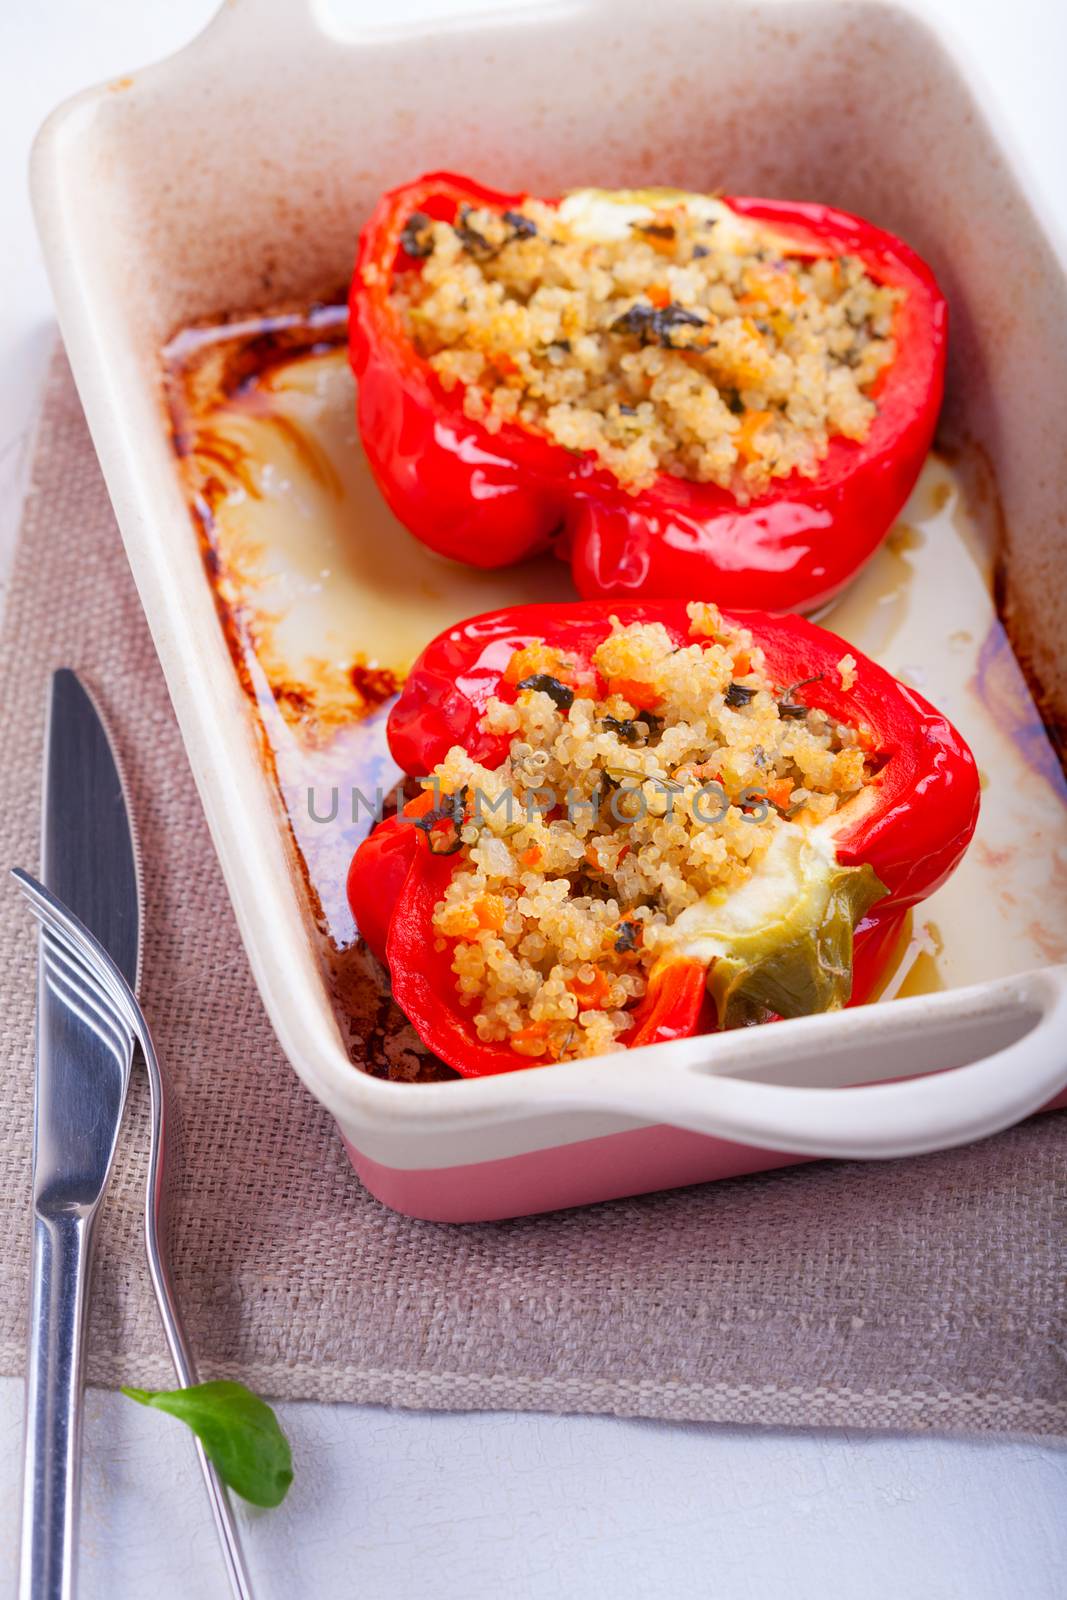 Stuffed Red Peppers by supercat67